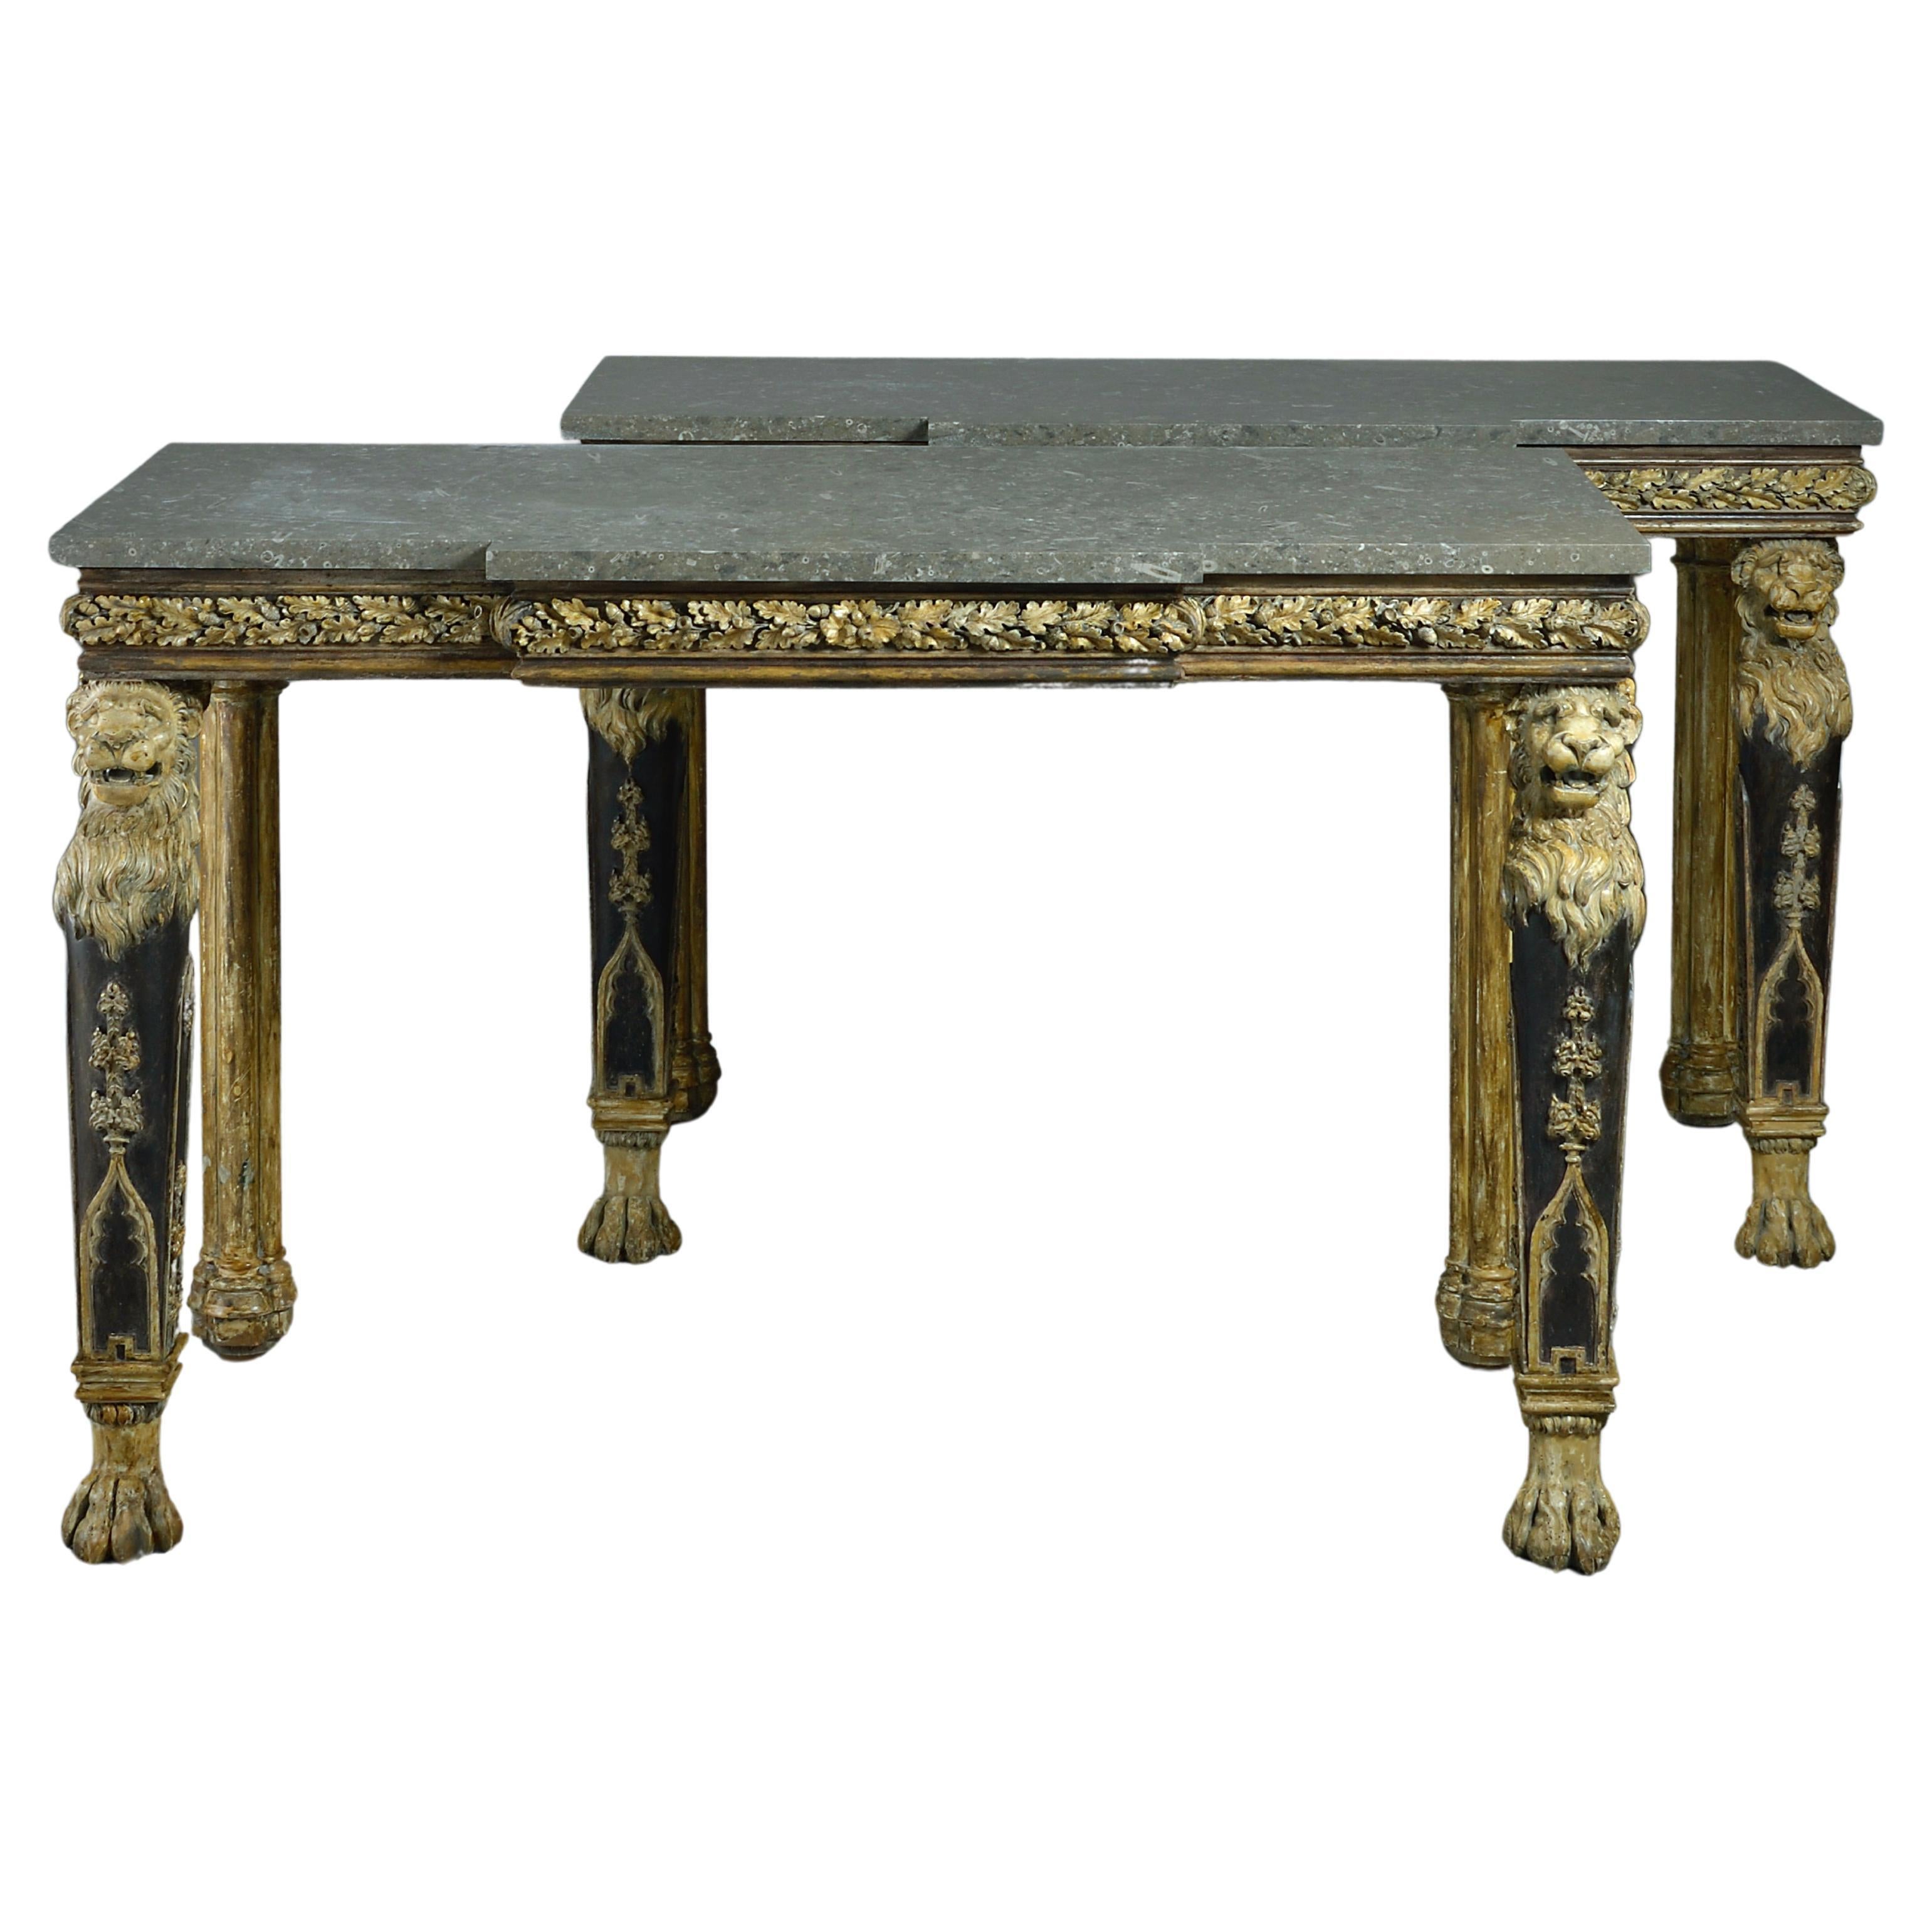 Pair of Irish George IV Side Tables attributed to James Del Vecchio of Dublin